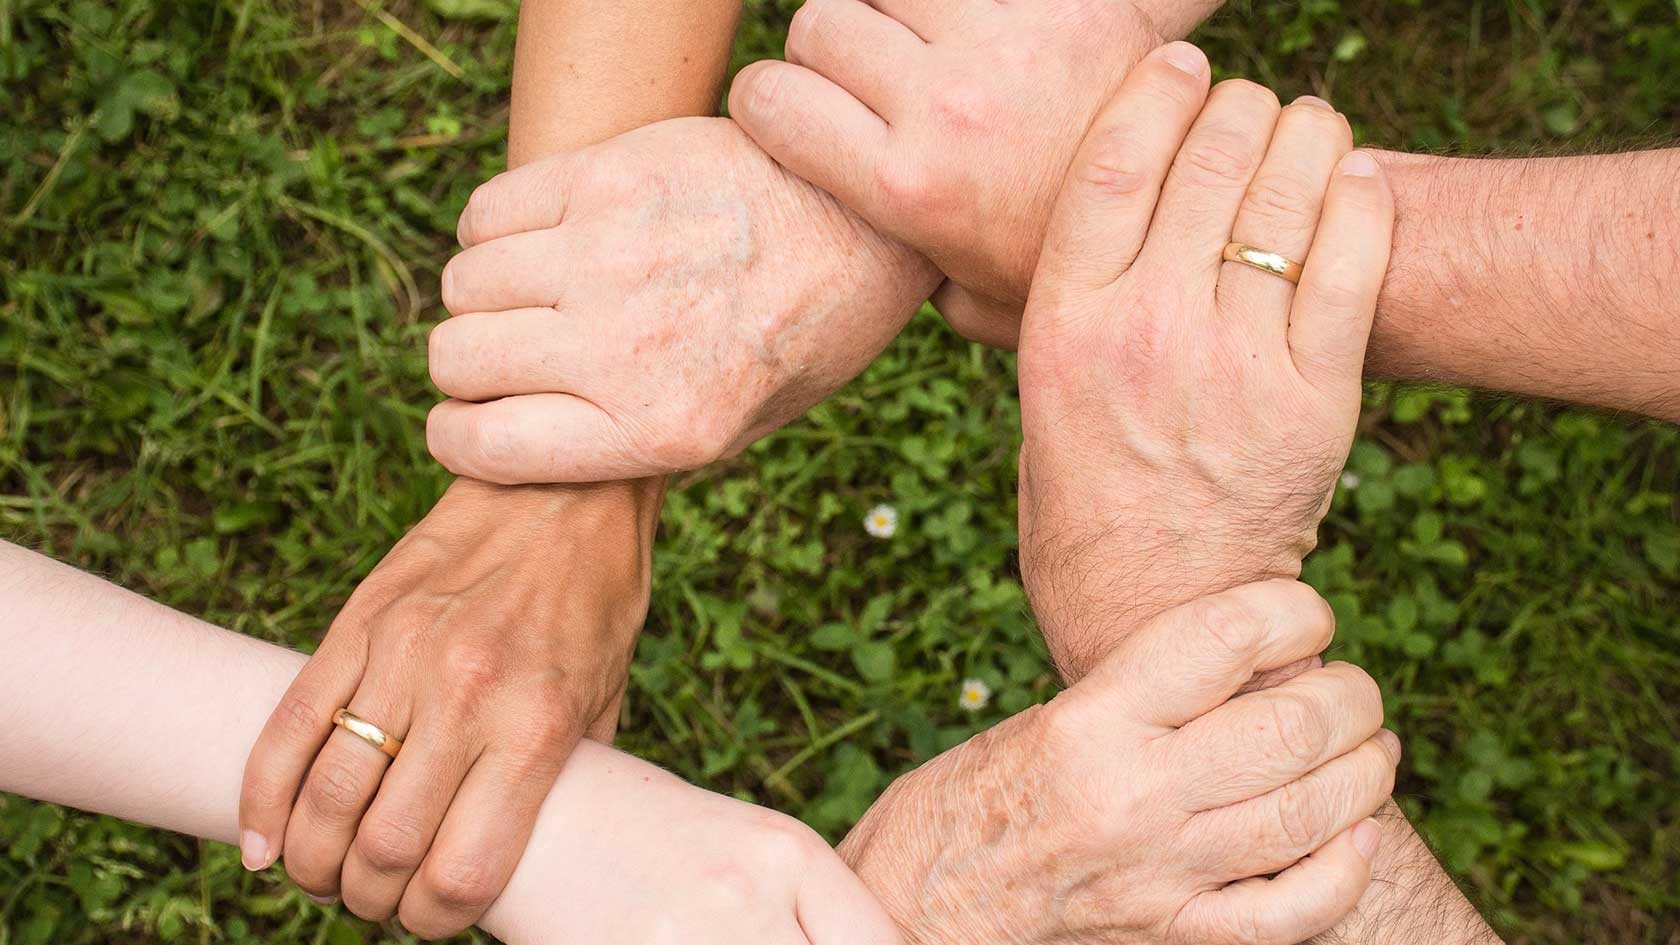 Circle of five hands representing the concept of community